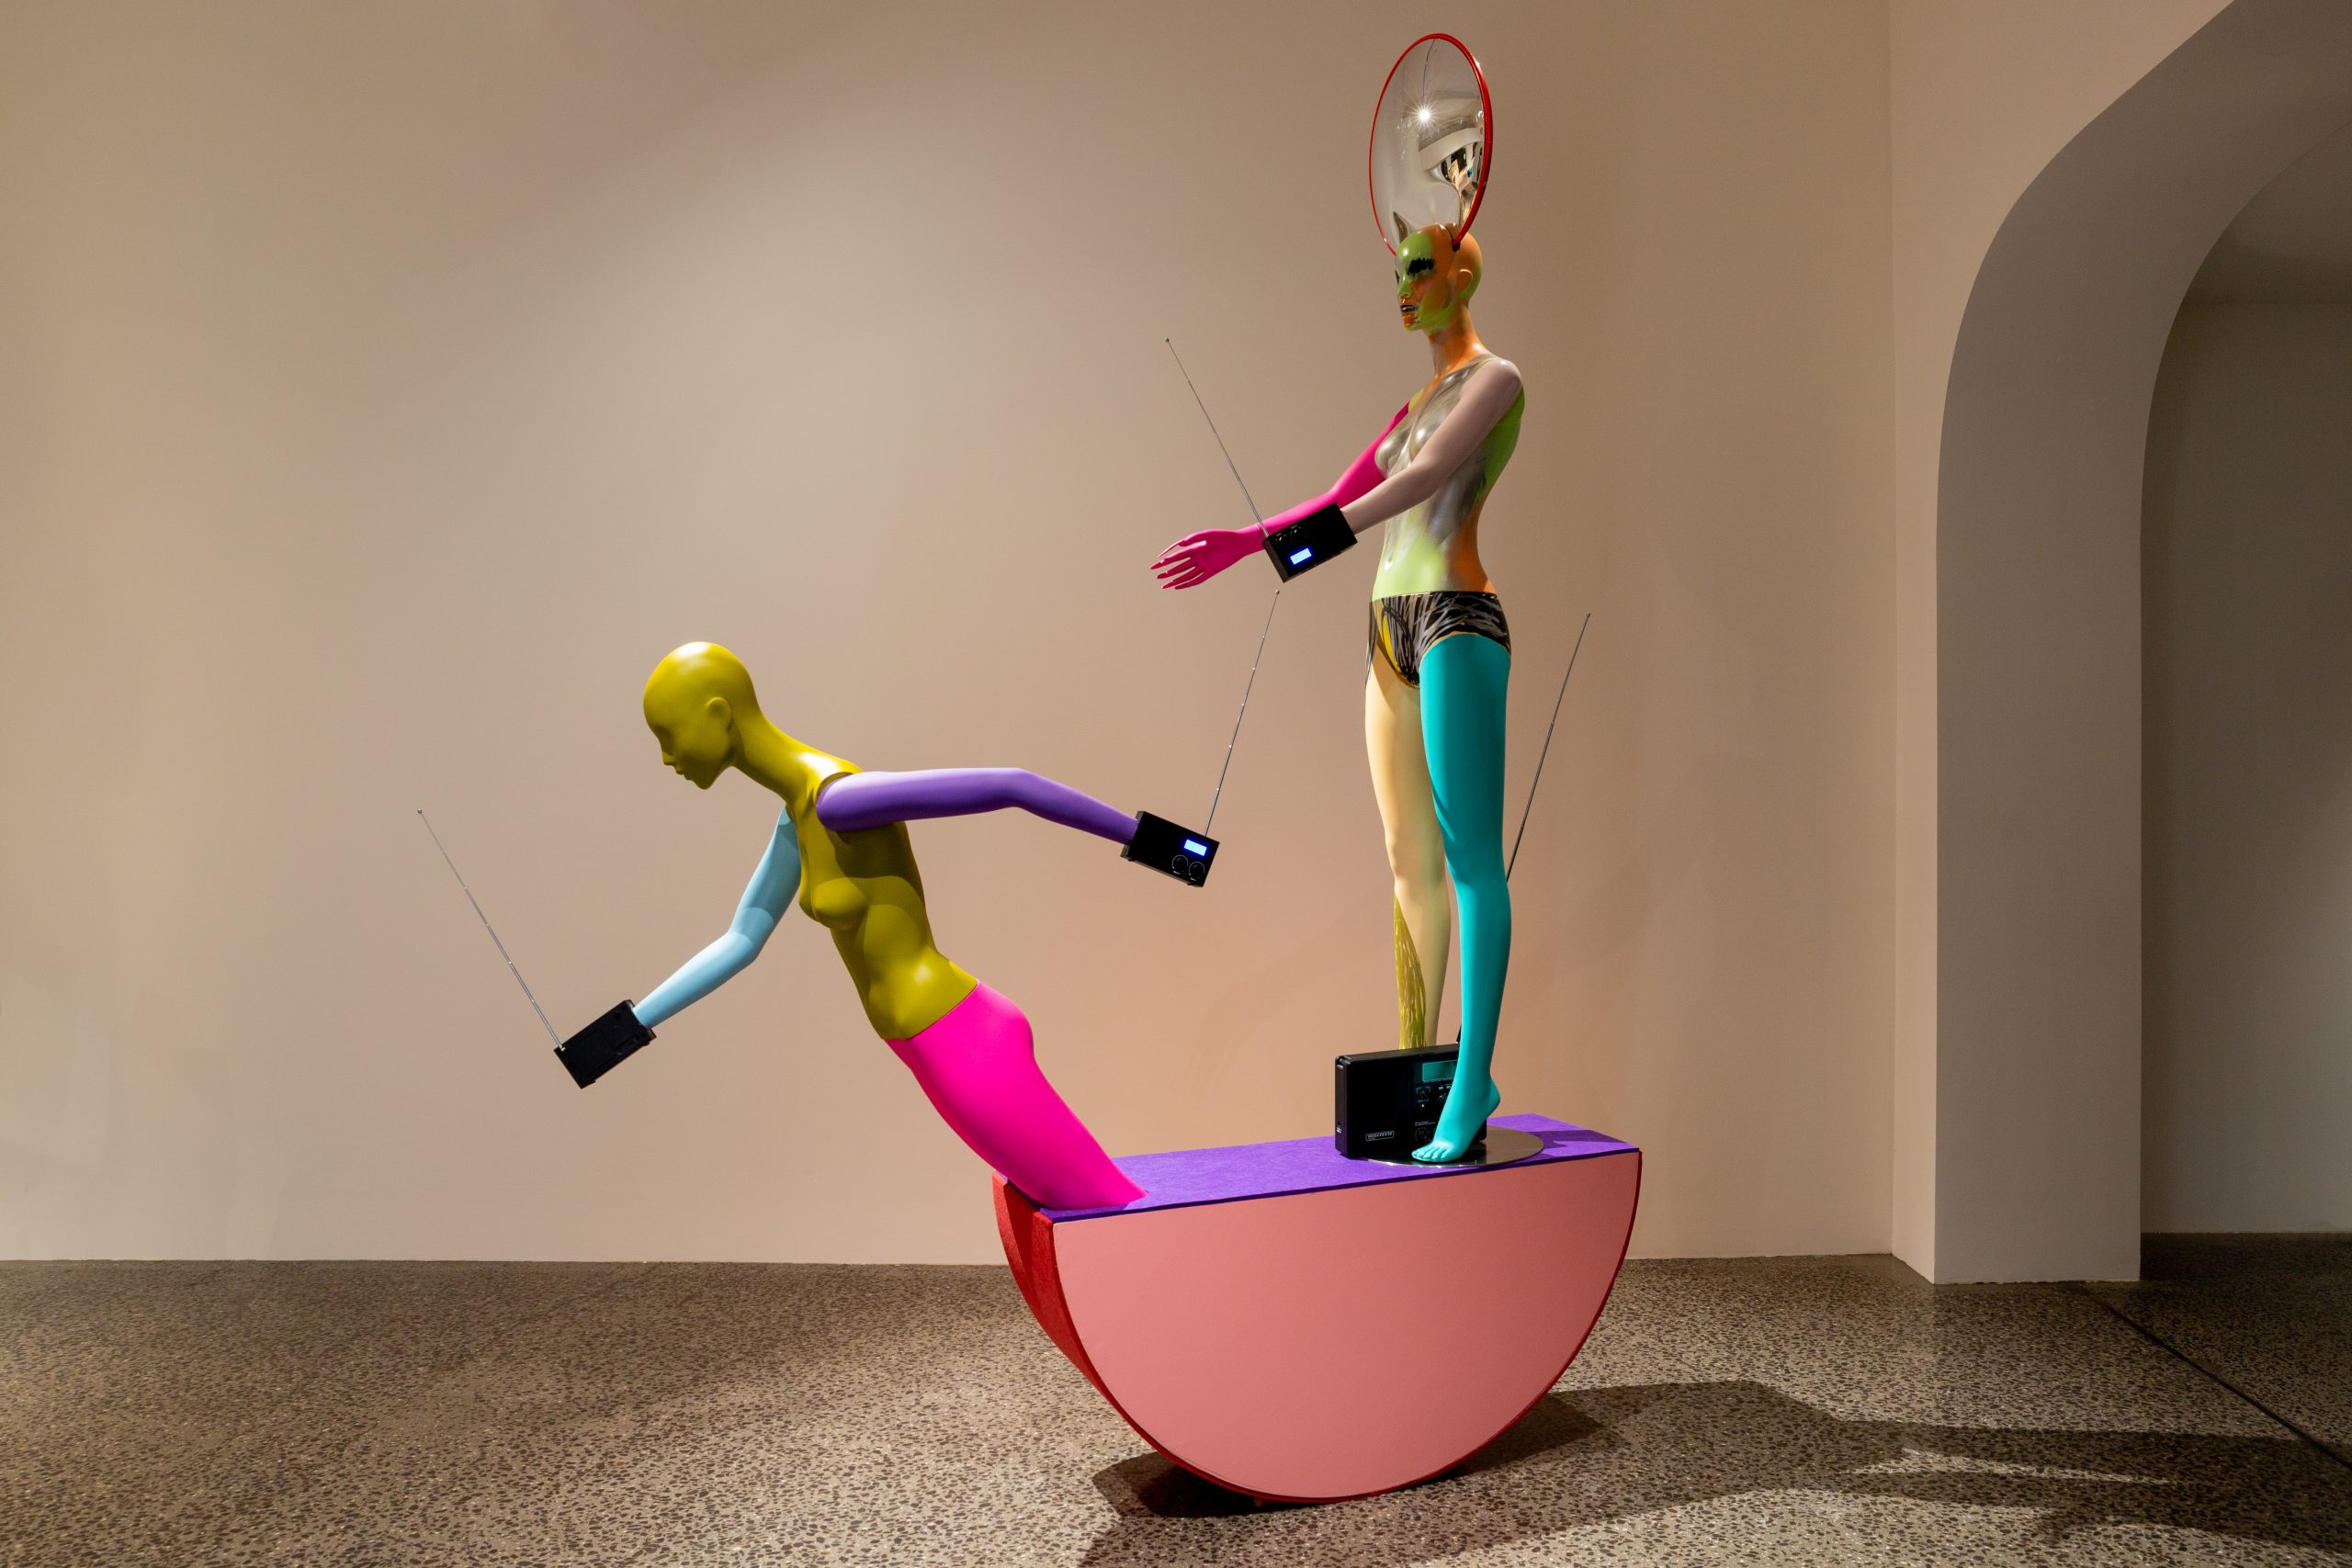 Justene Williams, <em>Hard Headed Woman</em>, 2022. Acoustic board, ply, paint, radios, mannequins, convex mirror, 120 x 60 x 200 cm. Courtesy of the artist and Sarah Cottier Gallery, Sydney.